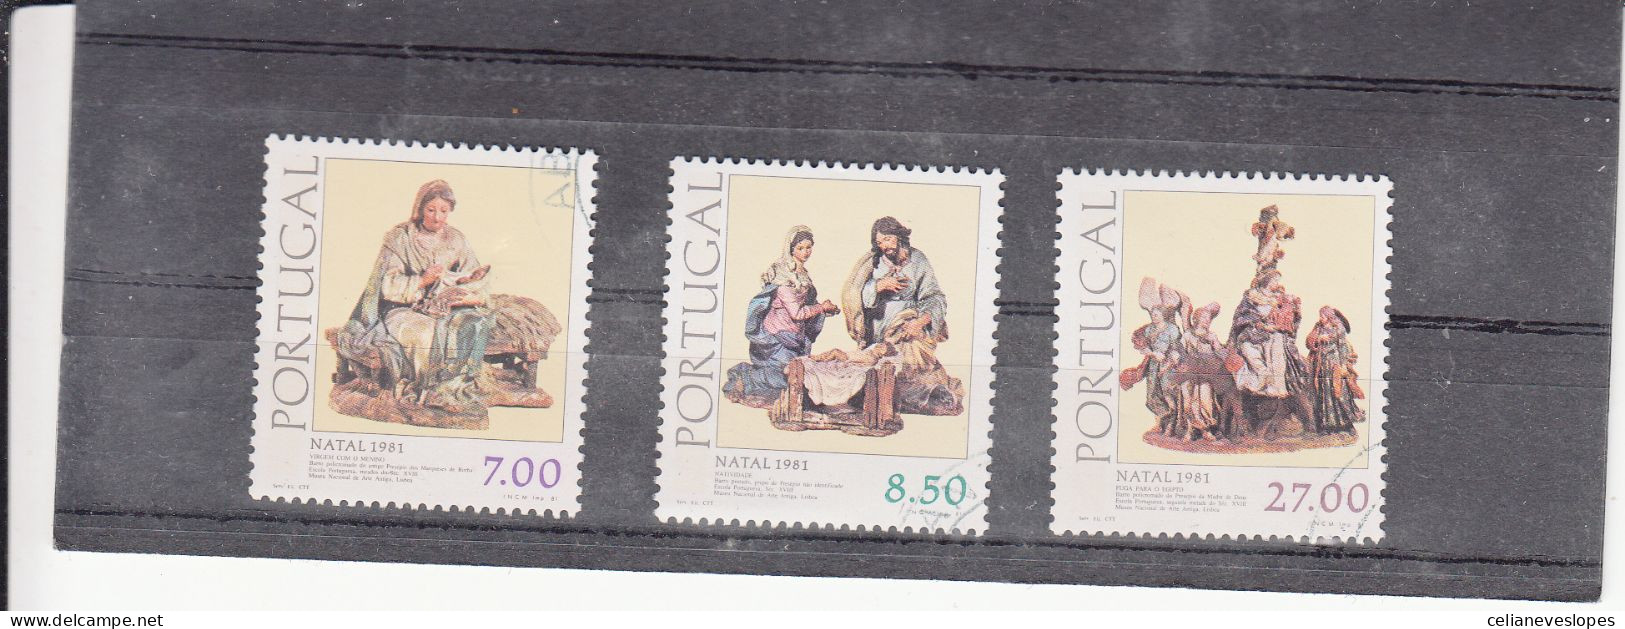 Portugal, Natal, 1981, Mundifil Nº 1550 A 1552 Used - Used Stamps